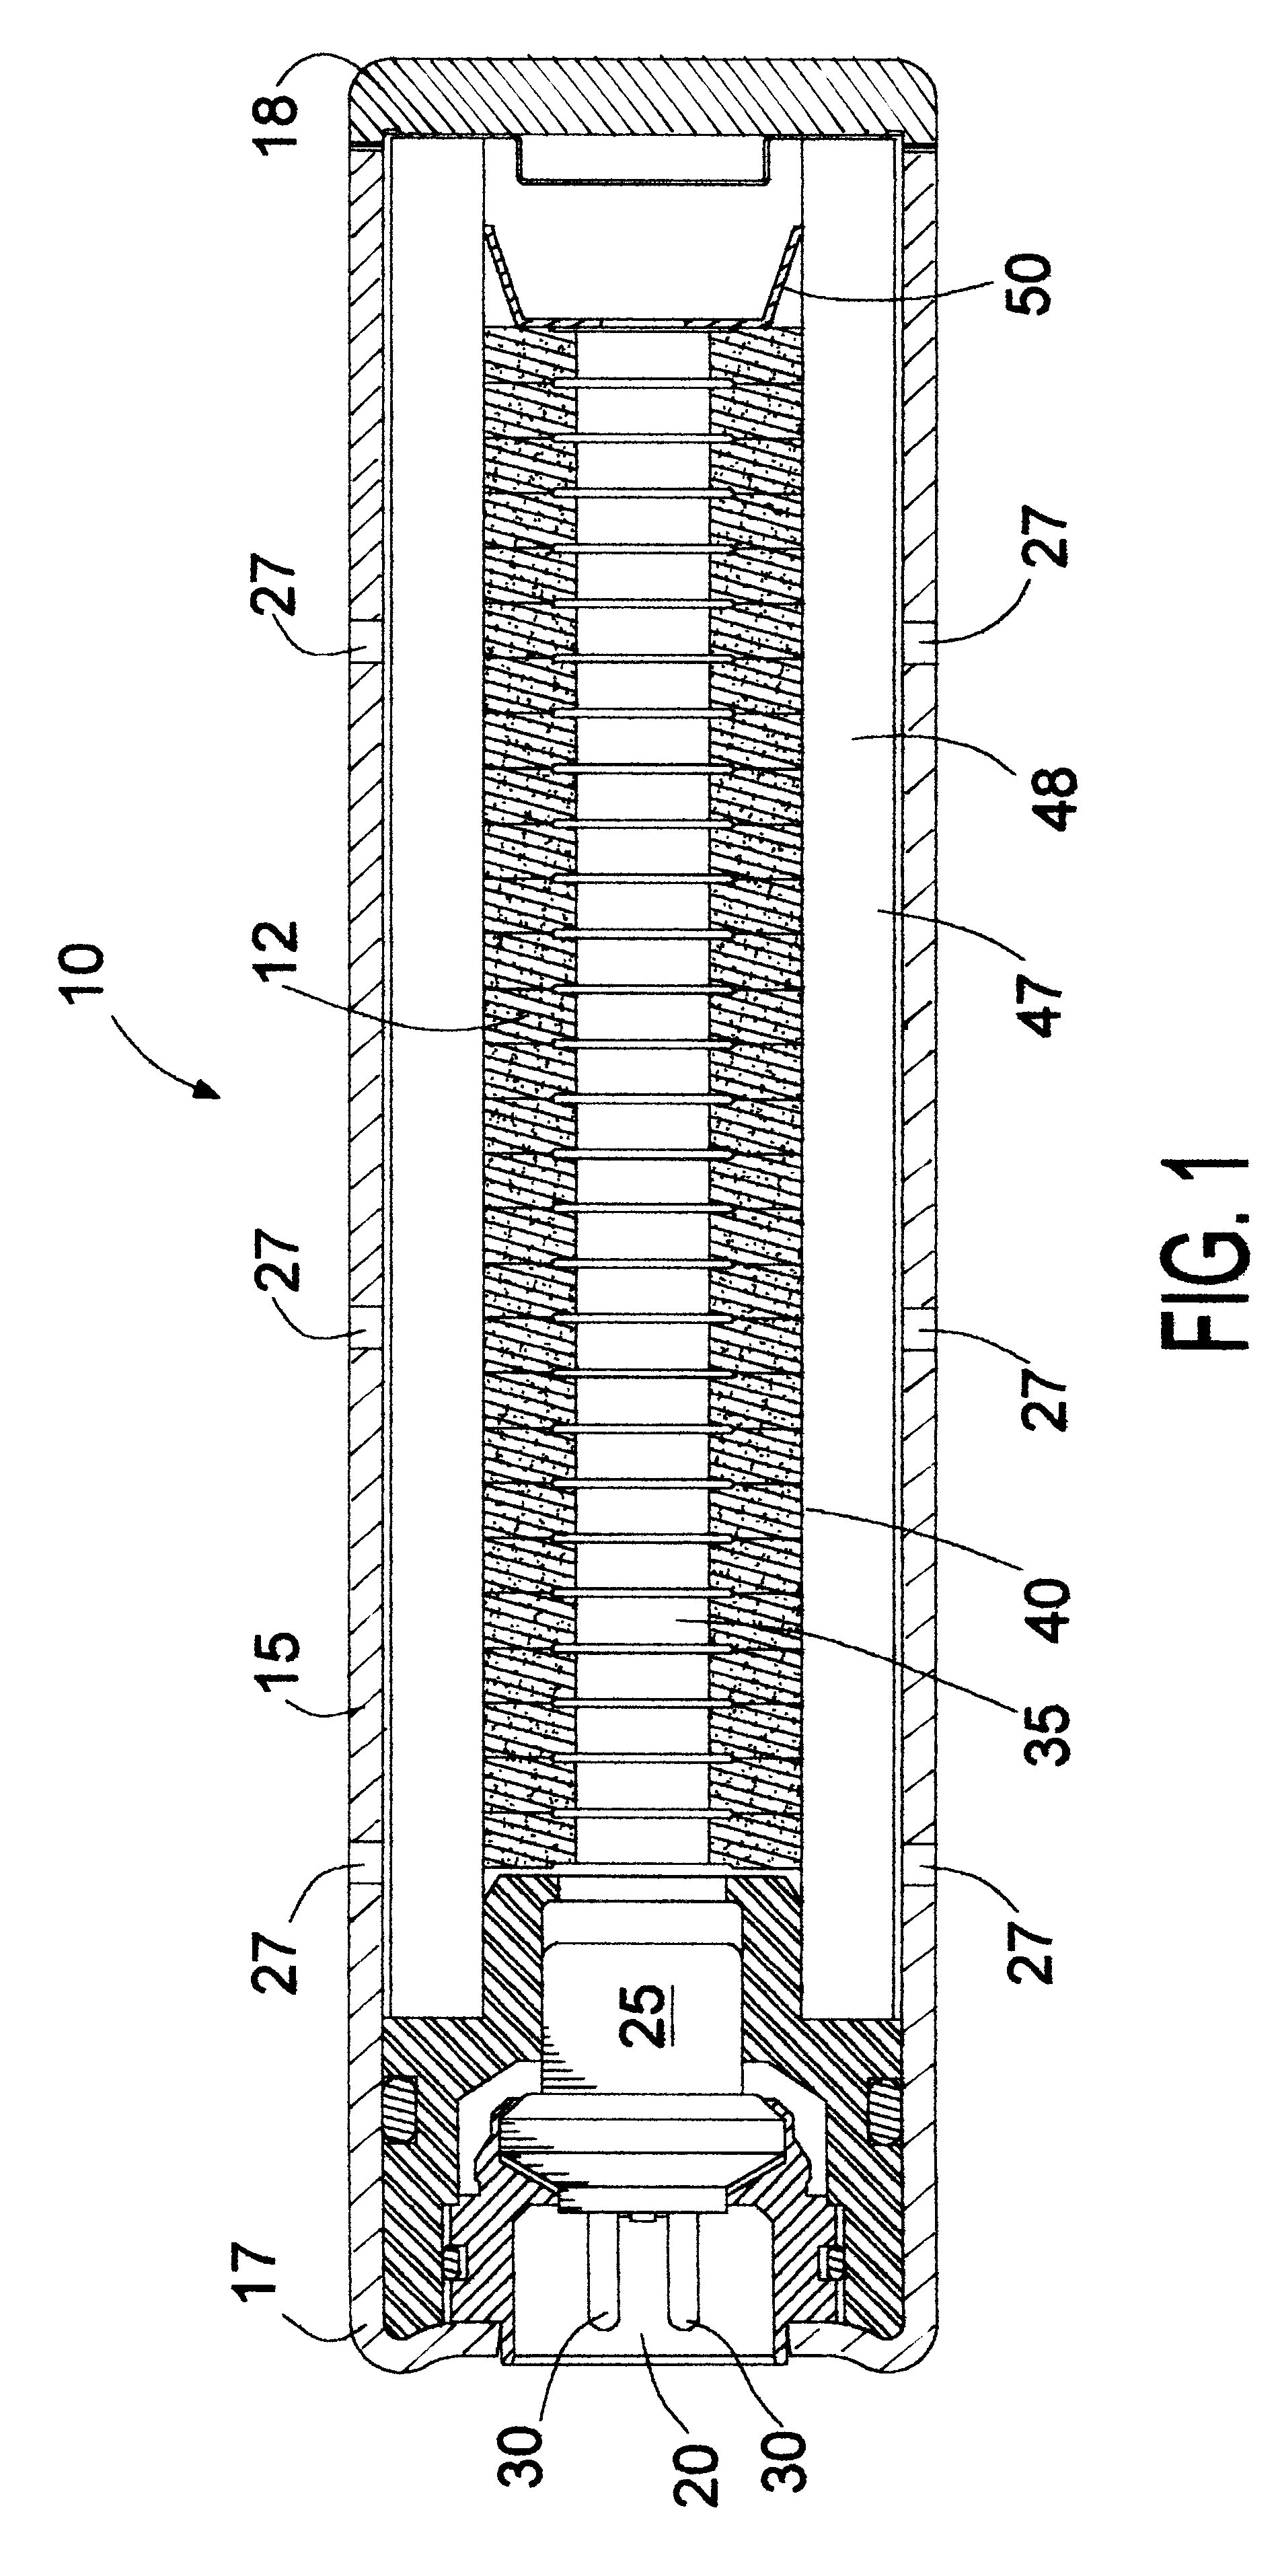 Ammonium nitrate and paraffinic material based gas generating propellants